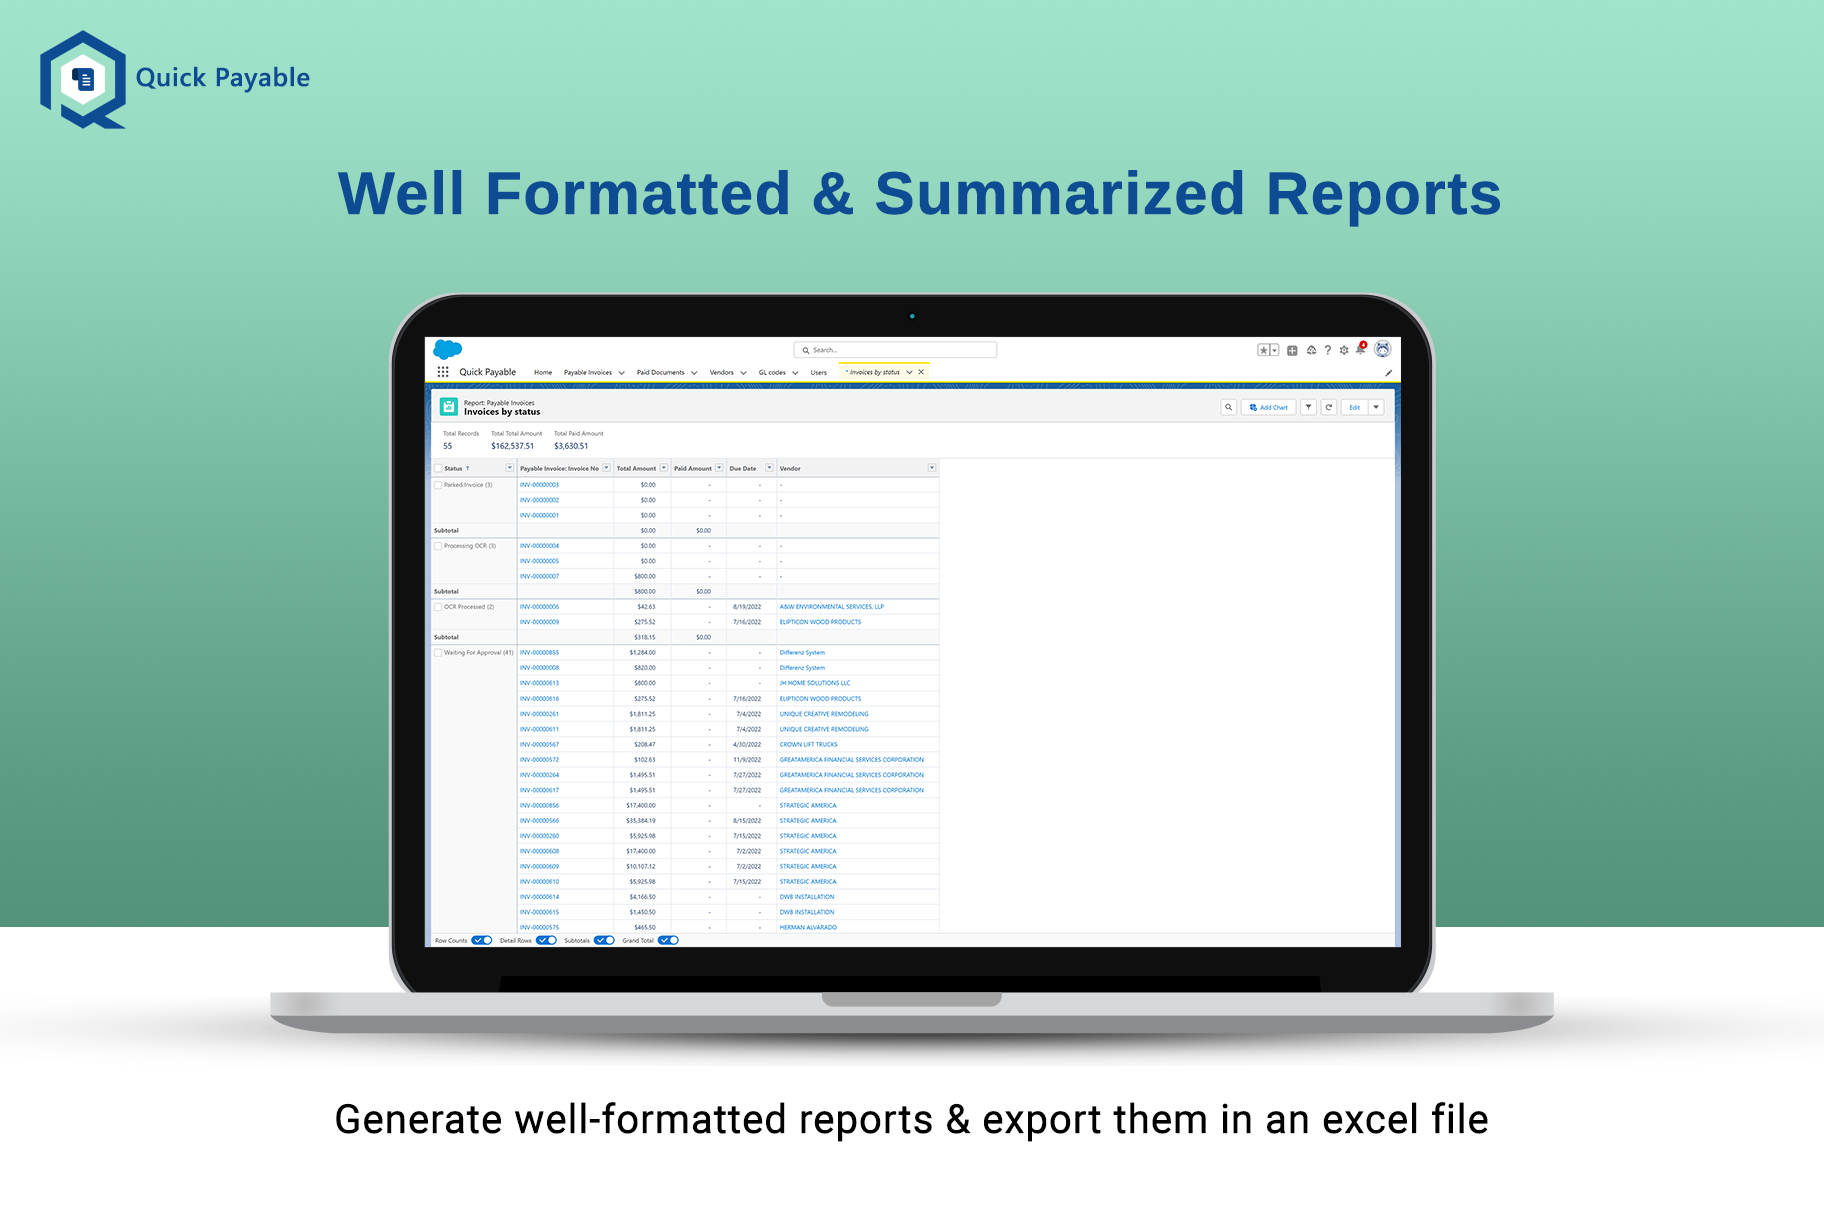 Well Formatted & Summarized Reports